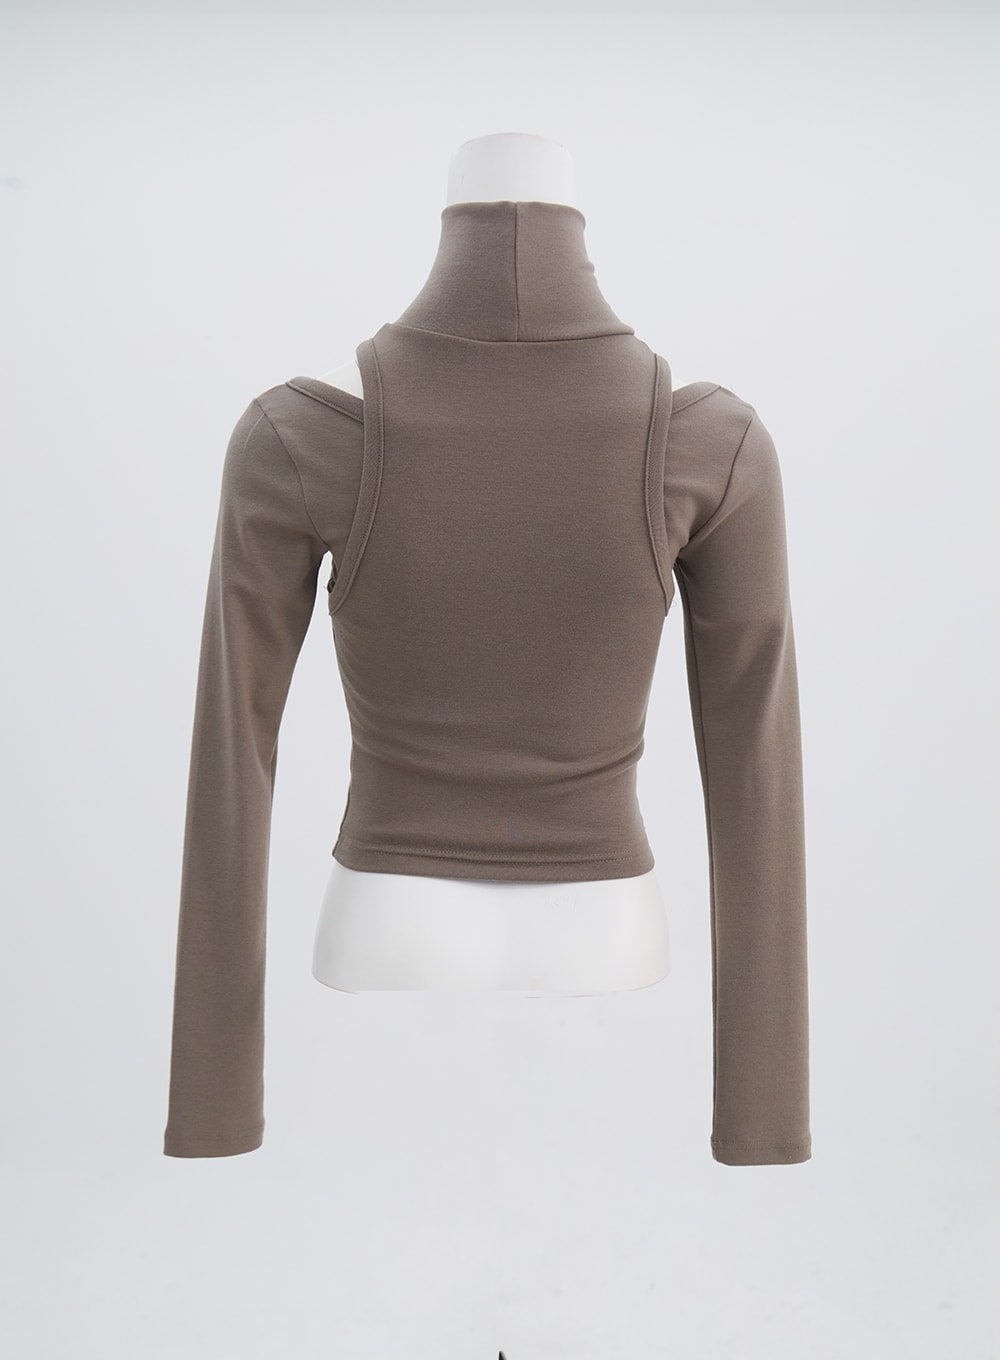 turtle-neck-cut-out-long-sleeve-top-cn314